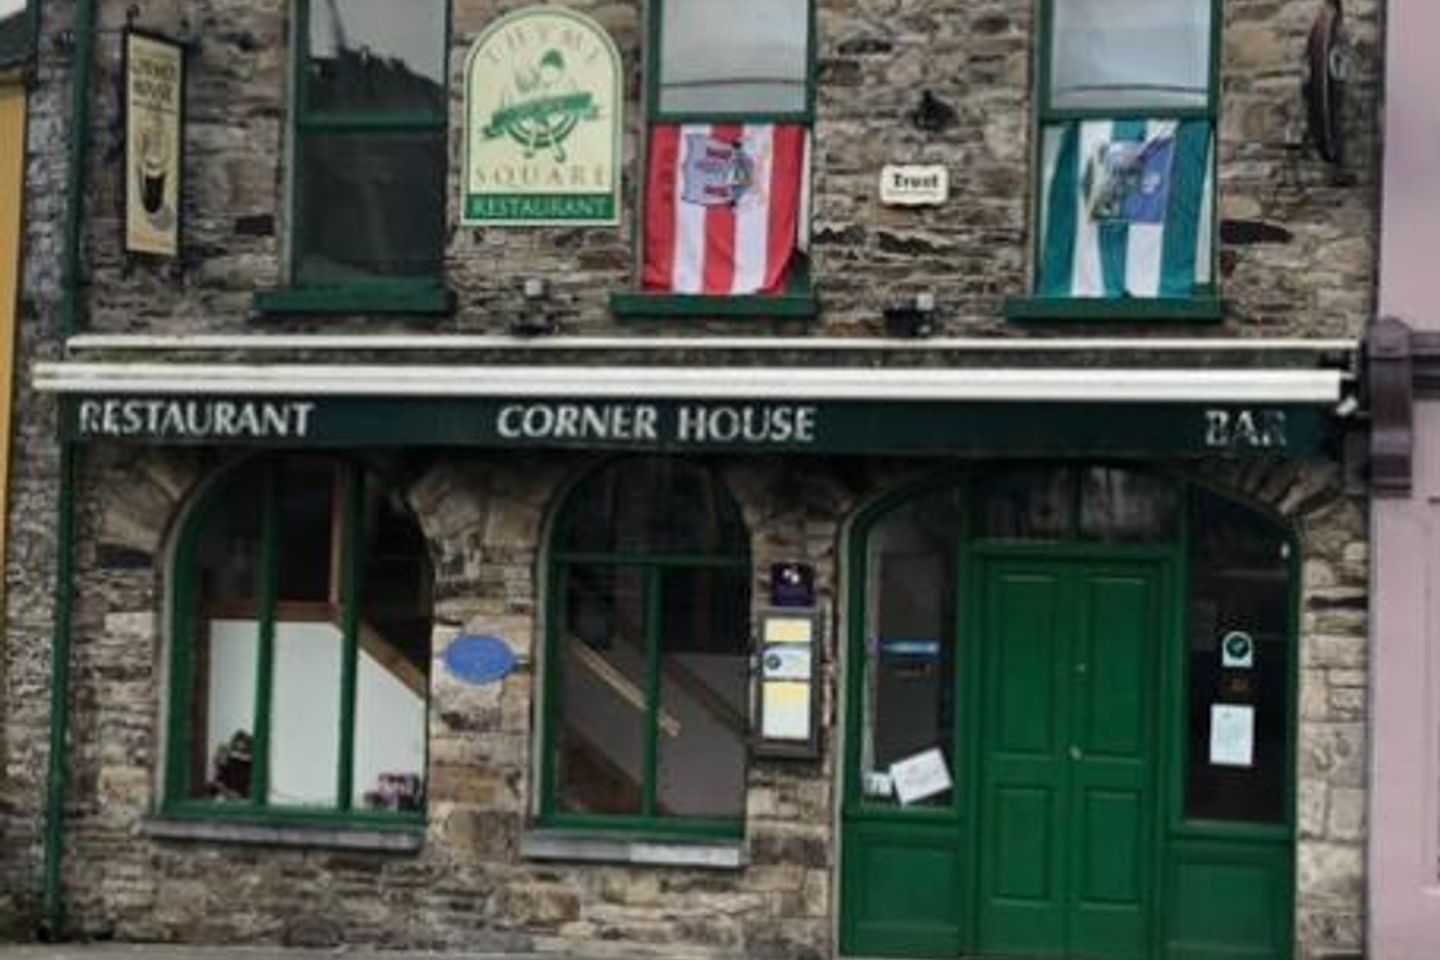 The Corner House,   The Square, Dromcolliher, Co. Limerick